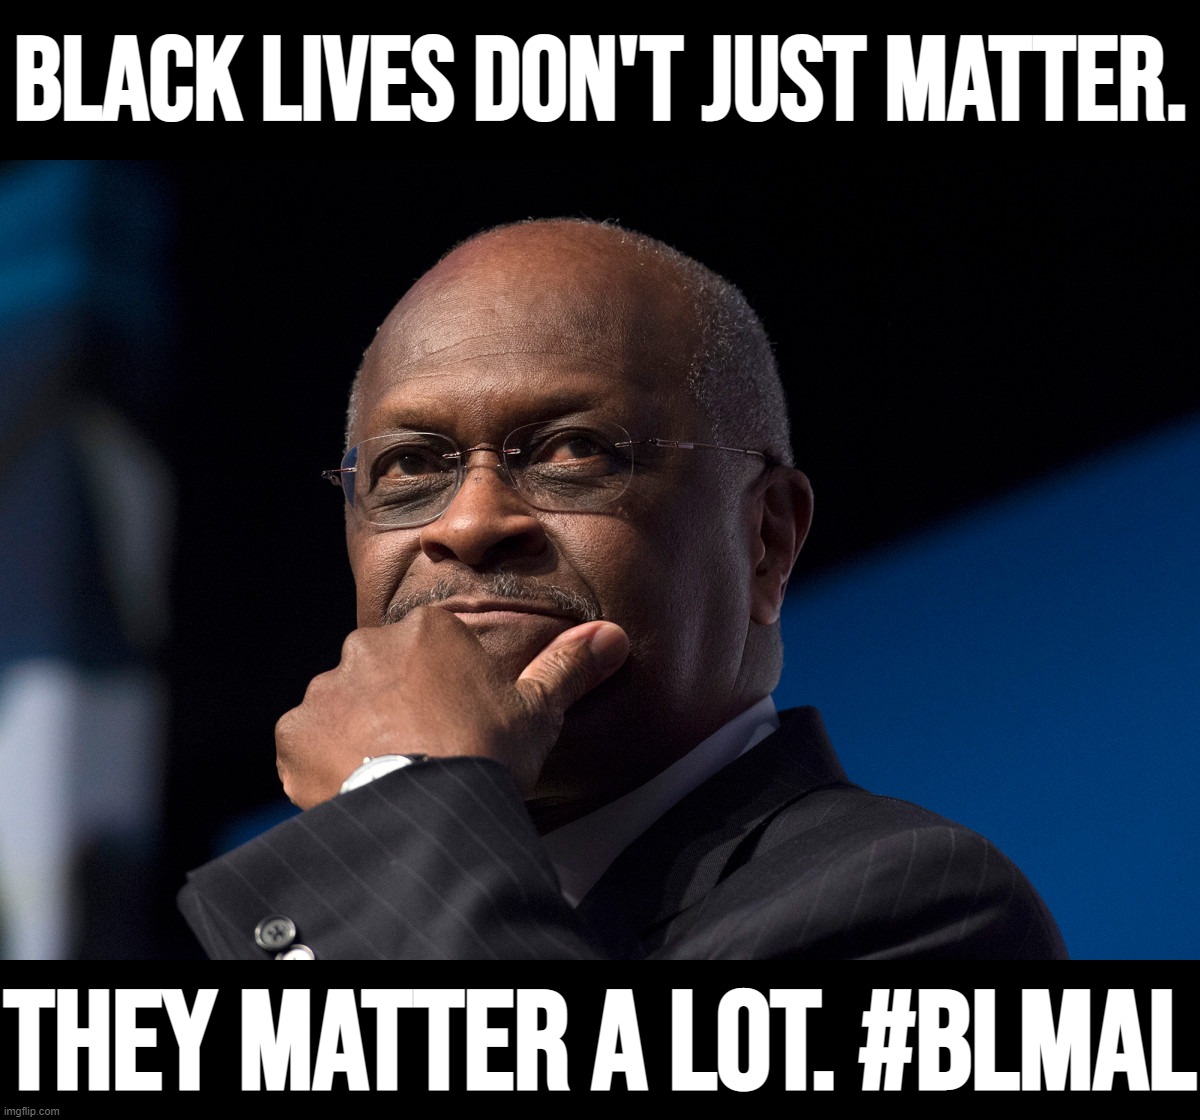 Focus group testing suggested improvements on recent political slogans. (R.I.P. Herman Cain) | BLACK LIVES DON'T JUST MATTER. THEY MATTER A LOT. #BLMAL | image tagged in herman cain thinking,black,lives,matter,a,lot | made w/ Imgflip meme maker